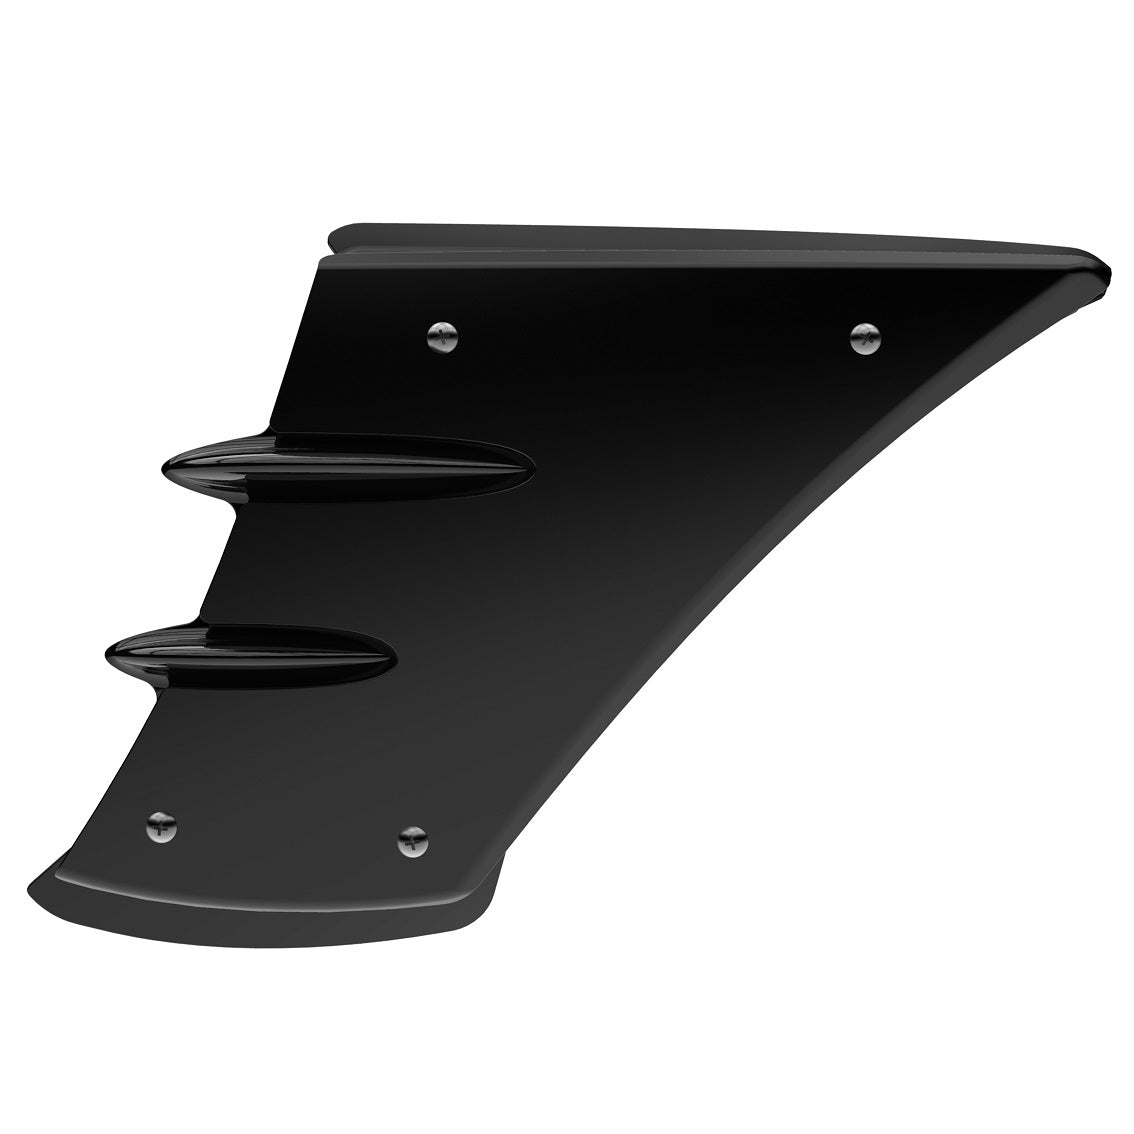 Universal Side Spoiler for Racing Bikes | Wings for KTM Yamaha Ducati | Ducati inspired Side Wings | Canards